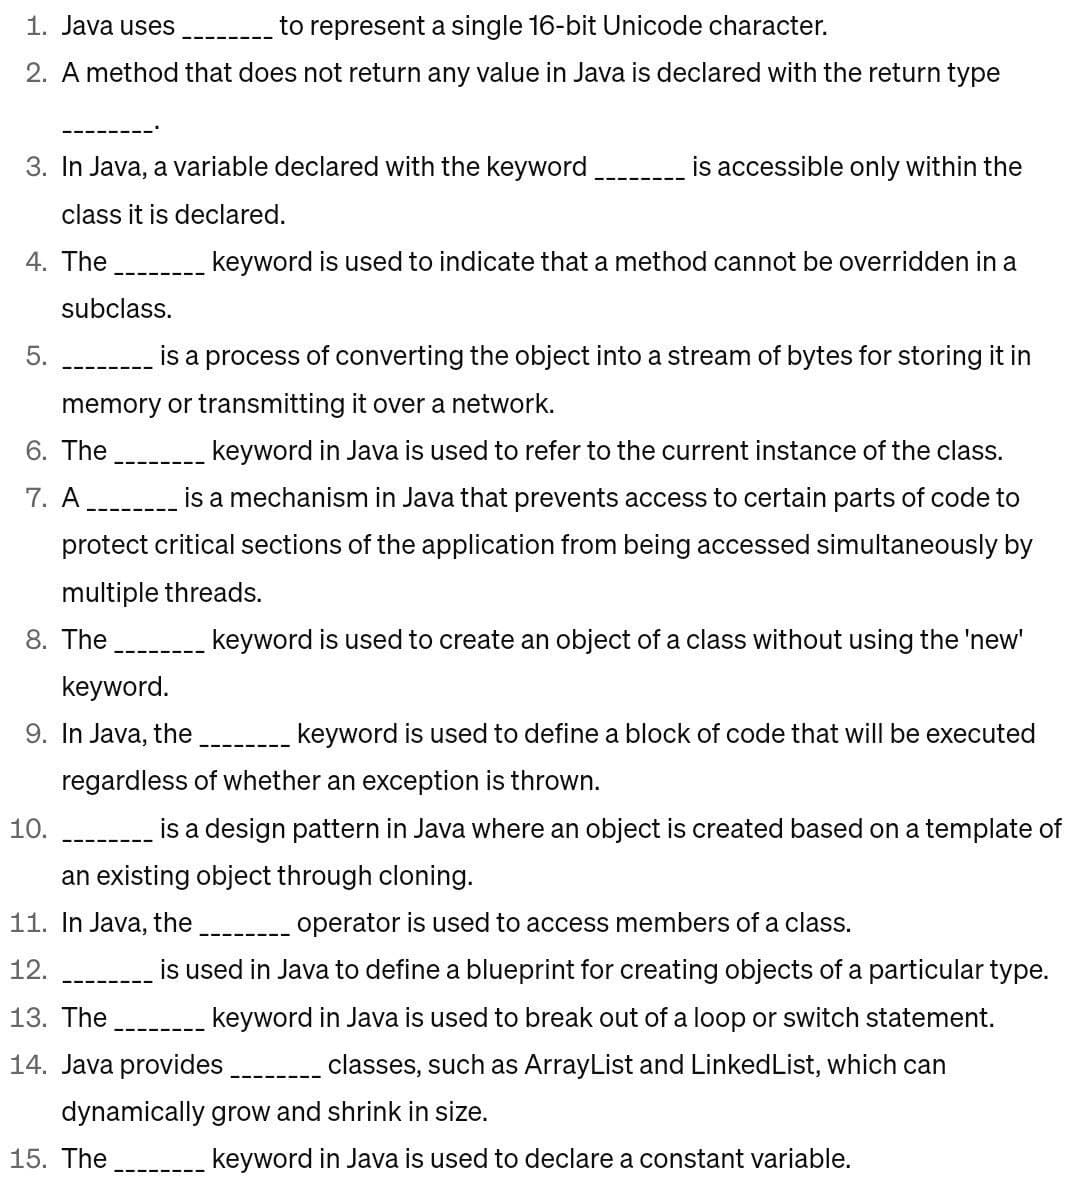 1. Java uses
to represent a single 16-bit Unicode character.
2. A method that does not return any value in Java is declared with the return type
3. In Java, a variable declared with the keyword
class it is declared.
4. The
5.
subclass.
is a process of converting the object into a stream of bytes for storing it in
memory or transmitting it over a network.
6. The
keyword in Java is used to refer to the current instance of the class.
7. A
is a mechanism in Java that prevents access to certain parts of code to
protect critical sections of the application from being accessed simultaneously by
multiple threads.
8. The
keyword is used to create an object of a class without using the 'new'
keyword.
9. In Java, the
10.
is accessible only within the
keyword is used to indicate that a method cannot be overridden in a
keyword is used to define a block of code that will be executed
regardless of whether an exception is thrown.
is a design pattern in Java where an object is created based on a template of
an existing object through cloning.
11. In Java, the ________ operator is used to access members of a class.
12.
is used in Java to define a blueprint for creating objects of a particular type.
keyword in Java is used to break out of a loop or switch statement.
classes, such as ArrayList and Linked List, which can
dynamically grow and shrink in size.
keyword in Java is used to declare a constant variable.
13. The
14. Java provides
15. The